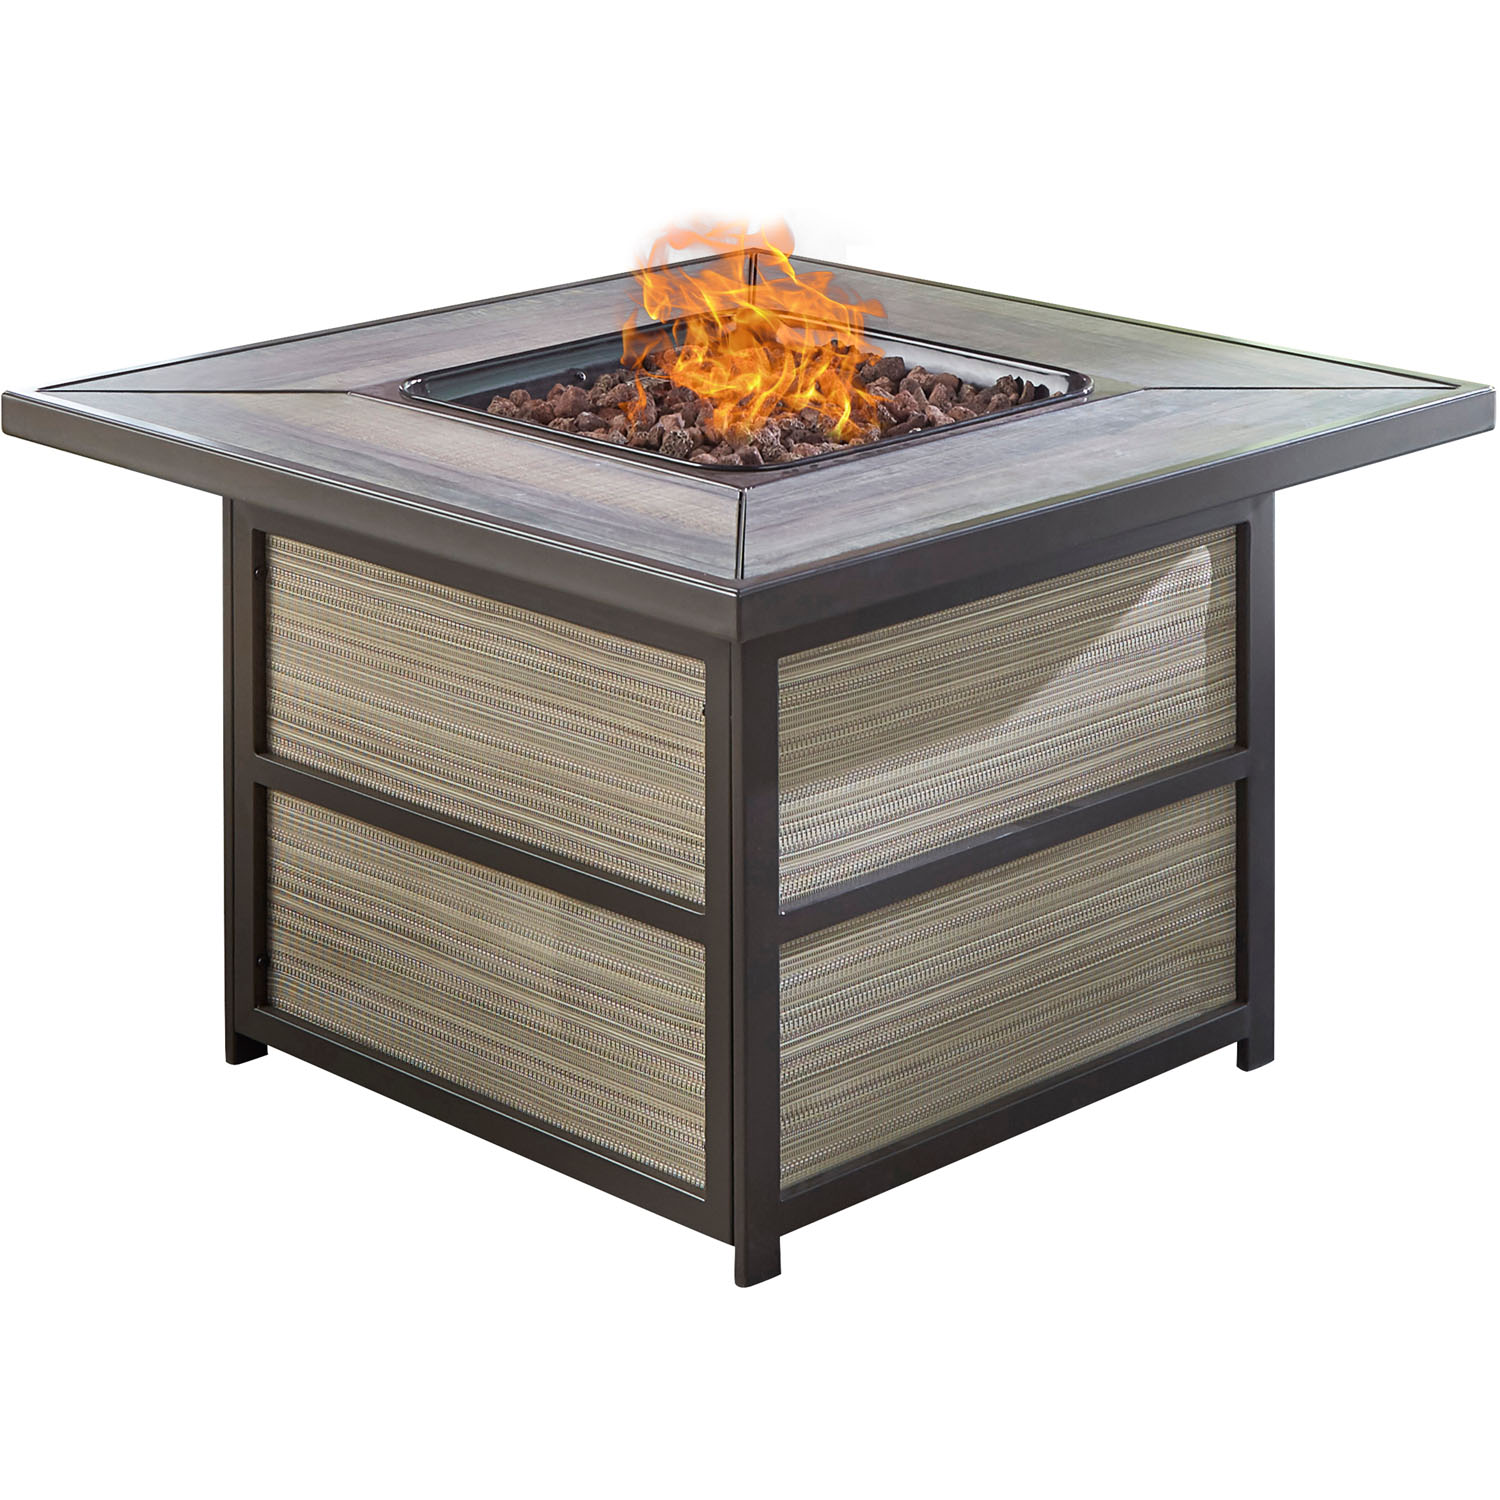 Hanover Orleans 5 Pcs Wicker and Steel Propane Fire Pit Chat Set, Avocado Green - image 5 of 9